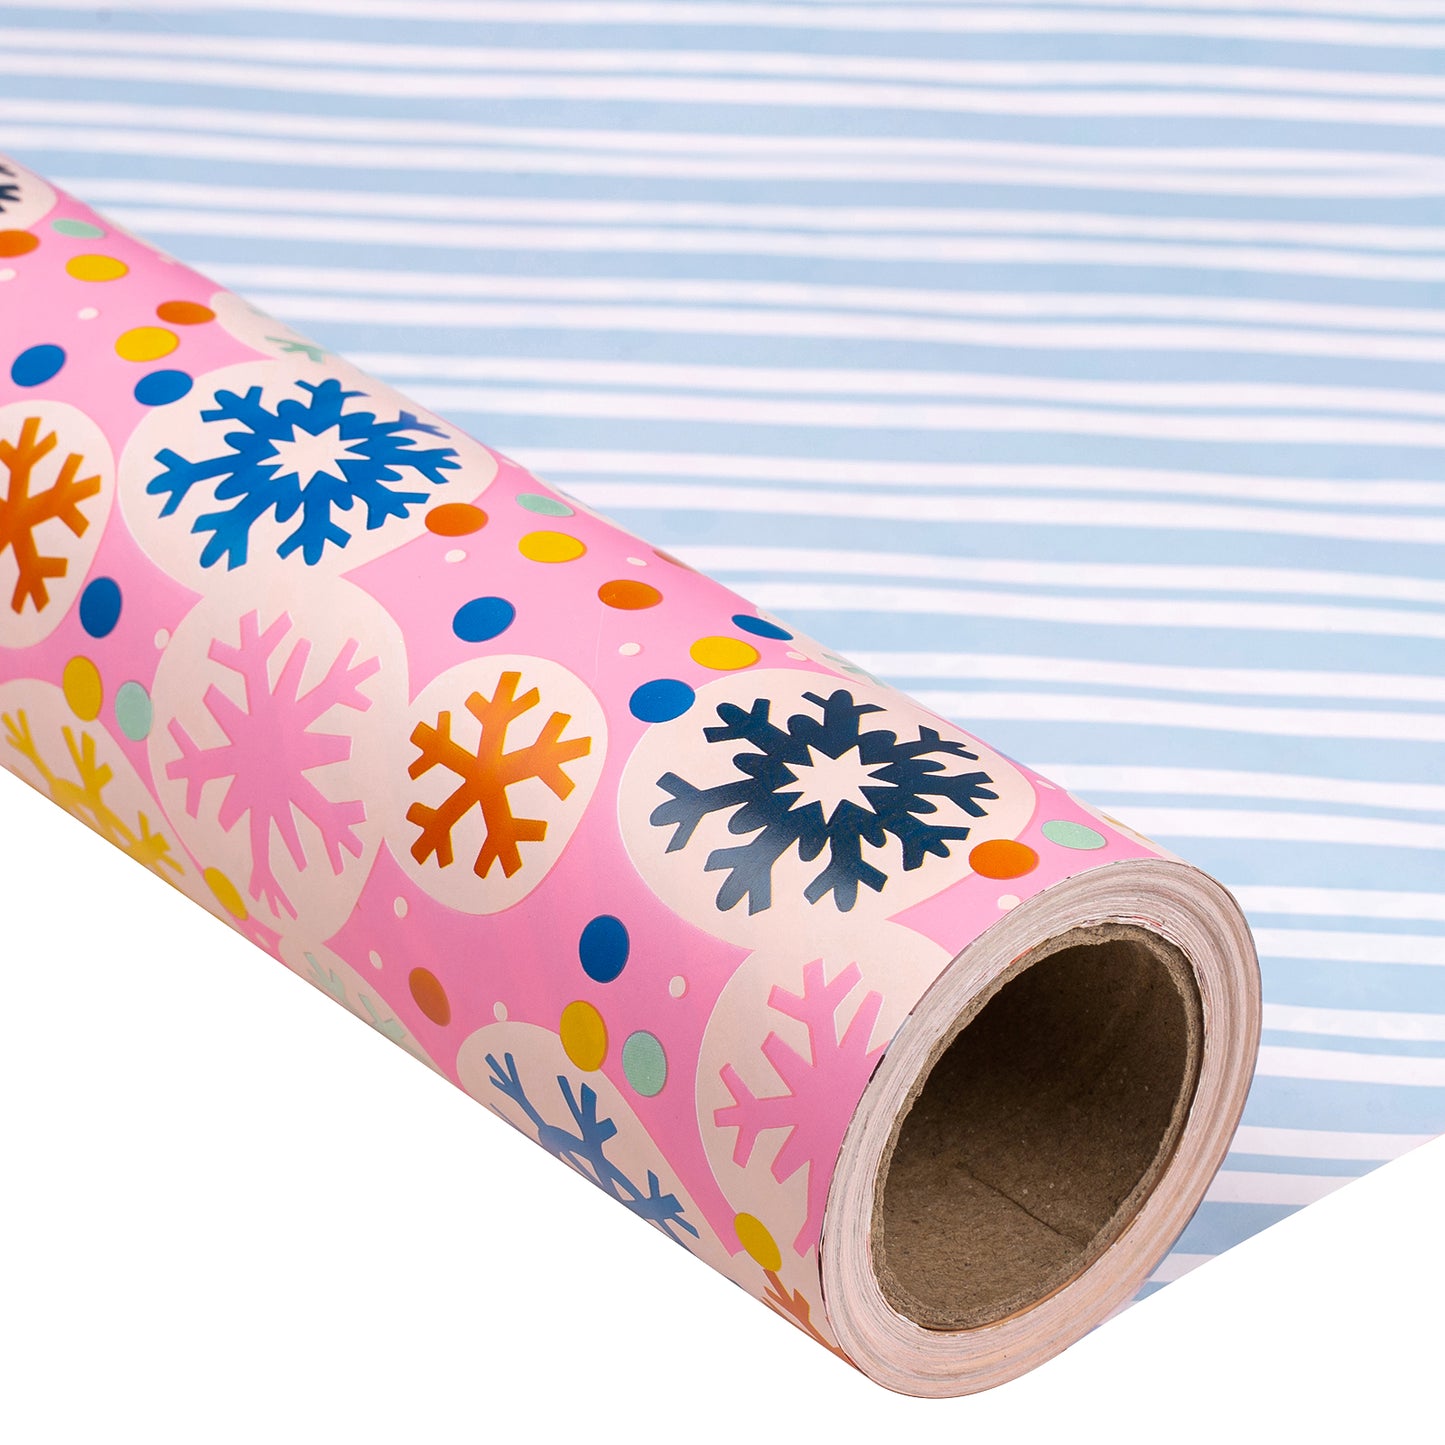 Pink Snowflake Wrapping Paper Roll with Blue and White Diagonal Stripes on The Back Wholesale Wrapholic